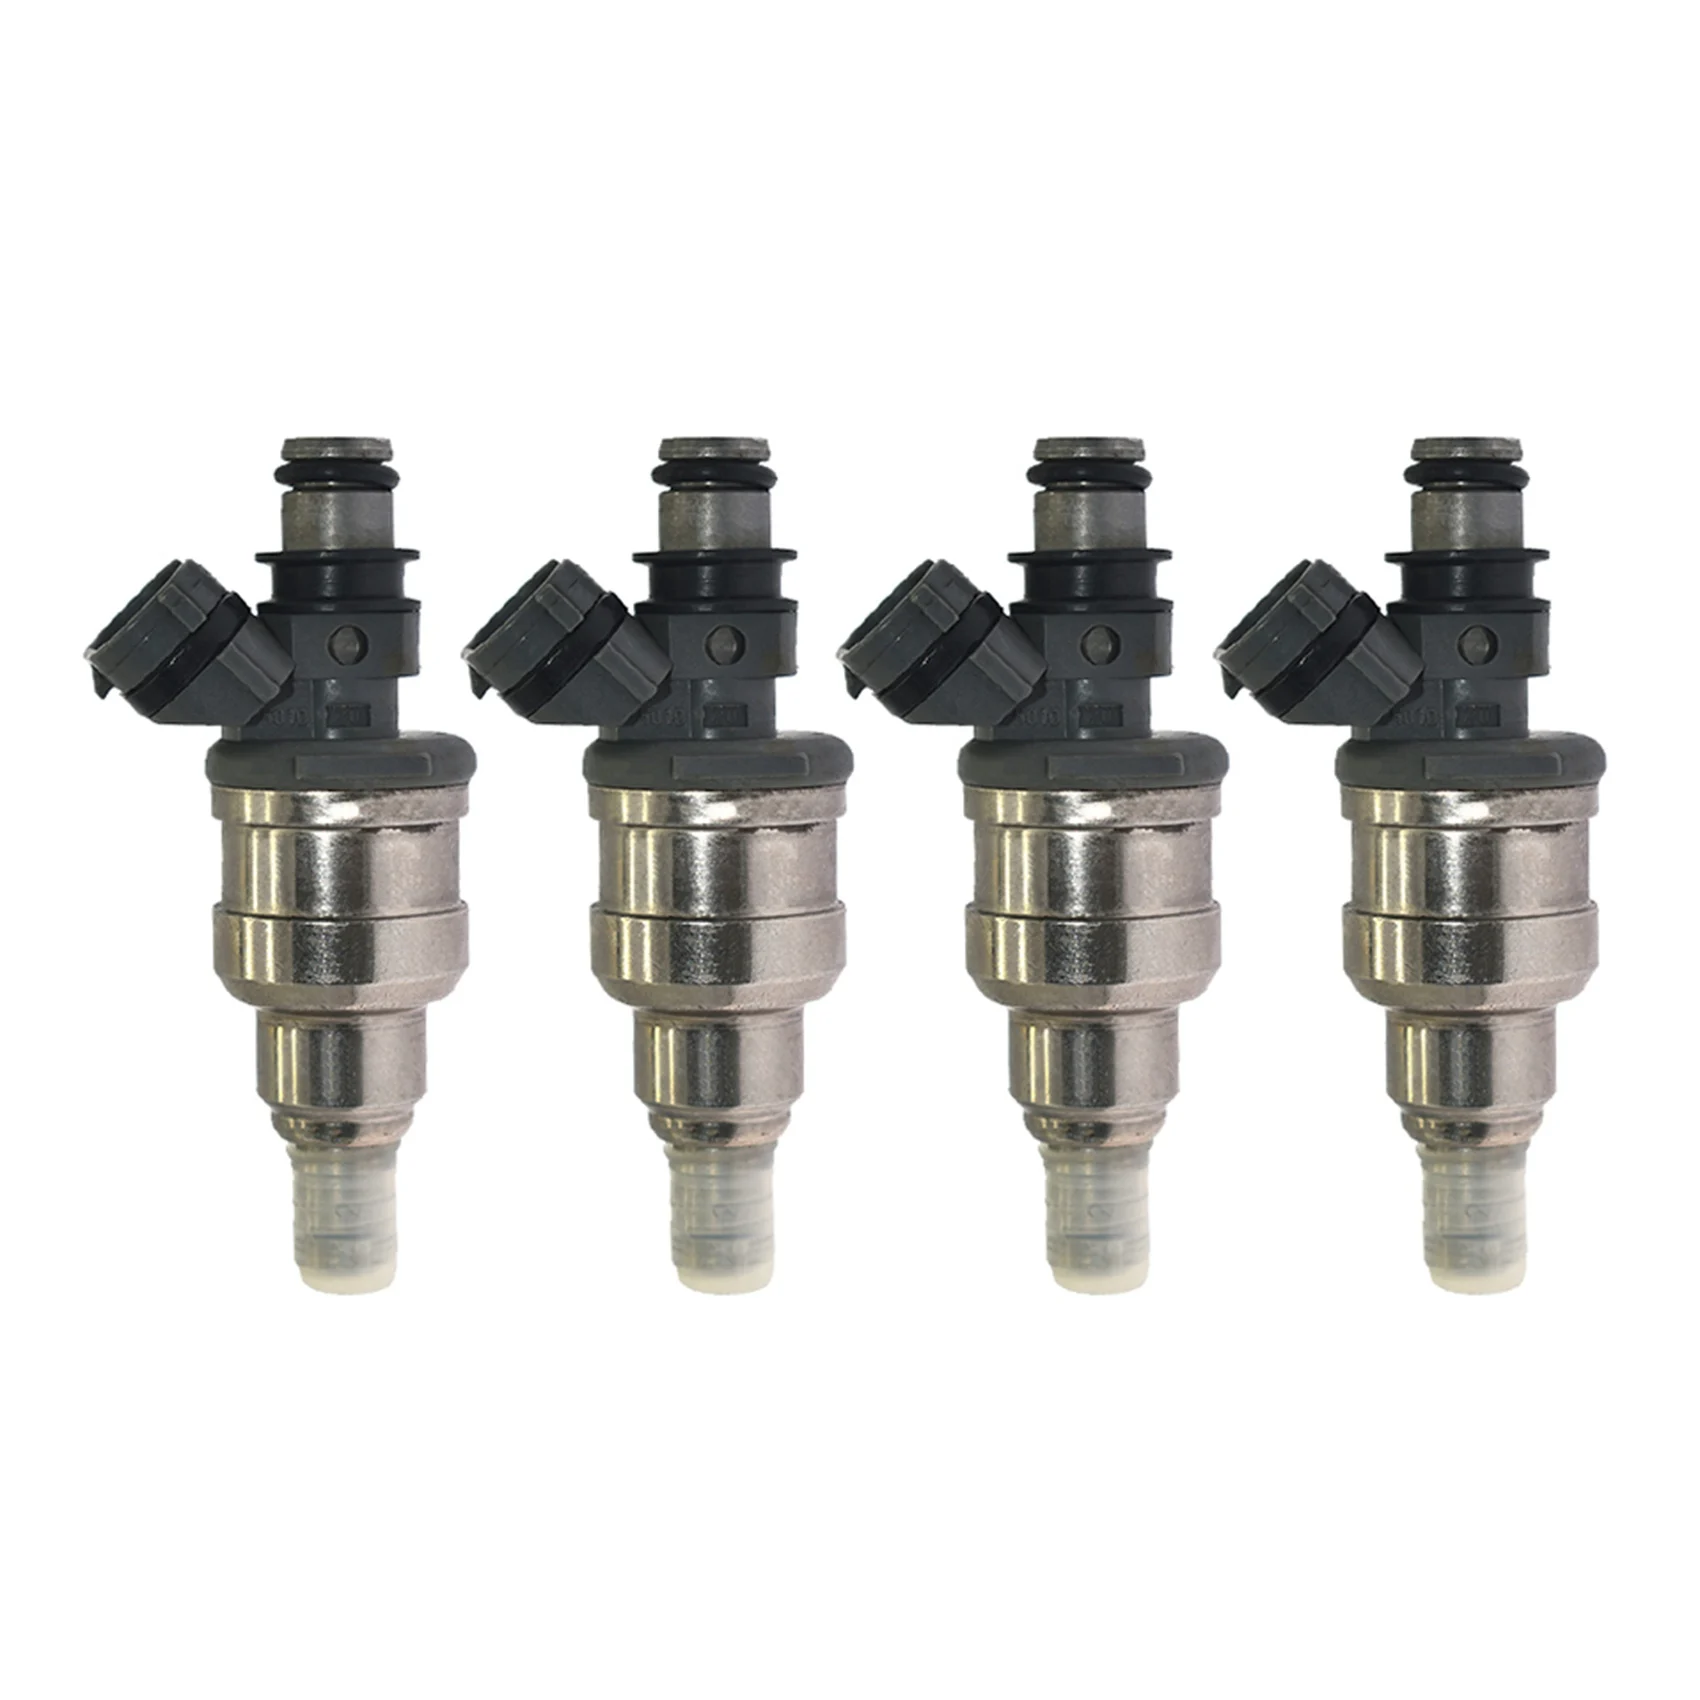 

4Pcs Fuel Injector for Toyota 1987 Camry Celica 23250-74030 23209-74030 Fuel Injector Nozzle